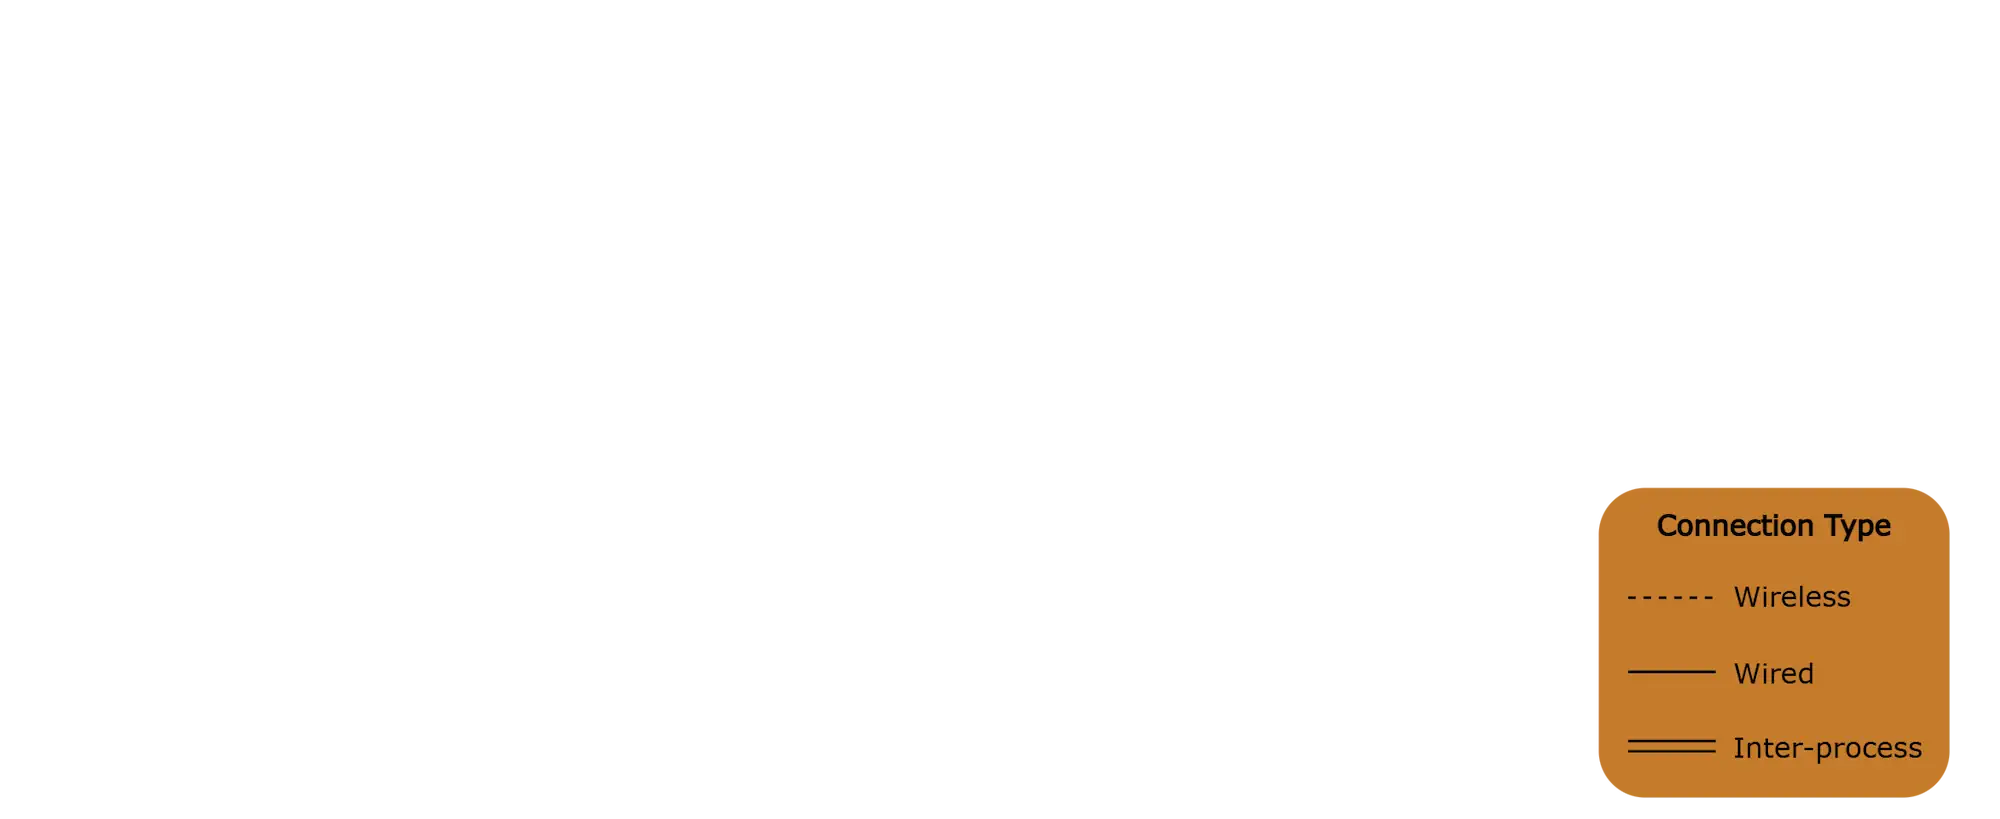 Overview of Rapha Rover's software components